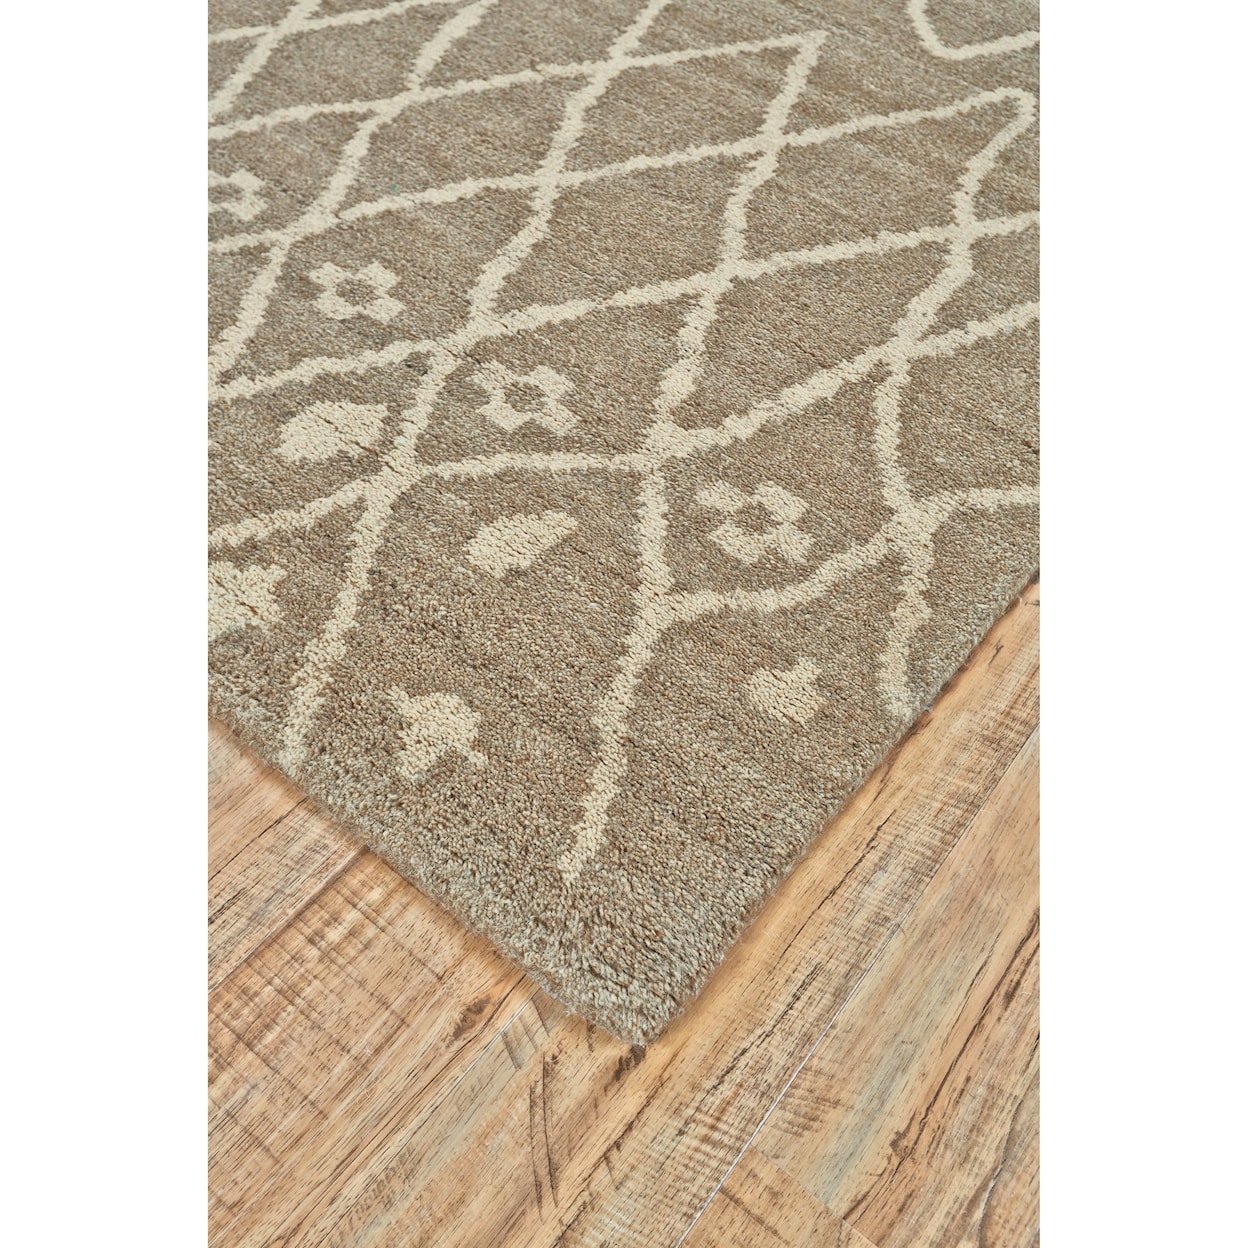 Feizy Rugs Barbary Natural/Slate 2' x 3' Area Rug